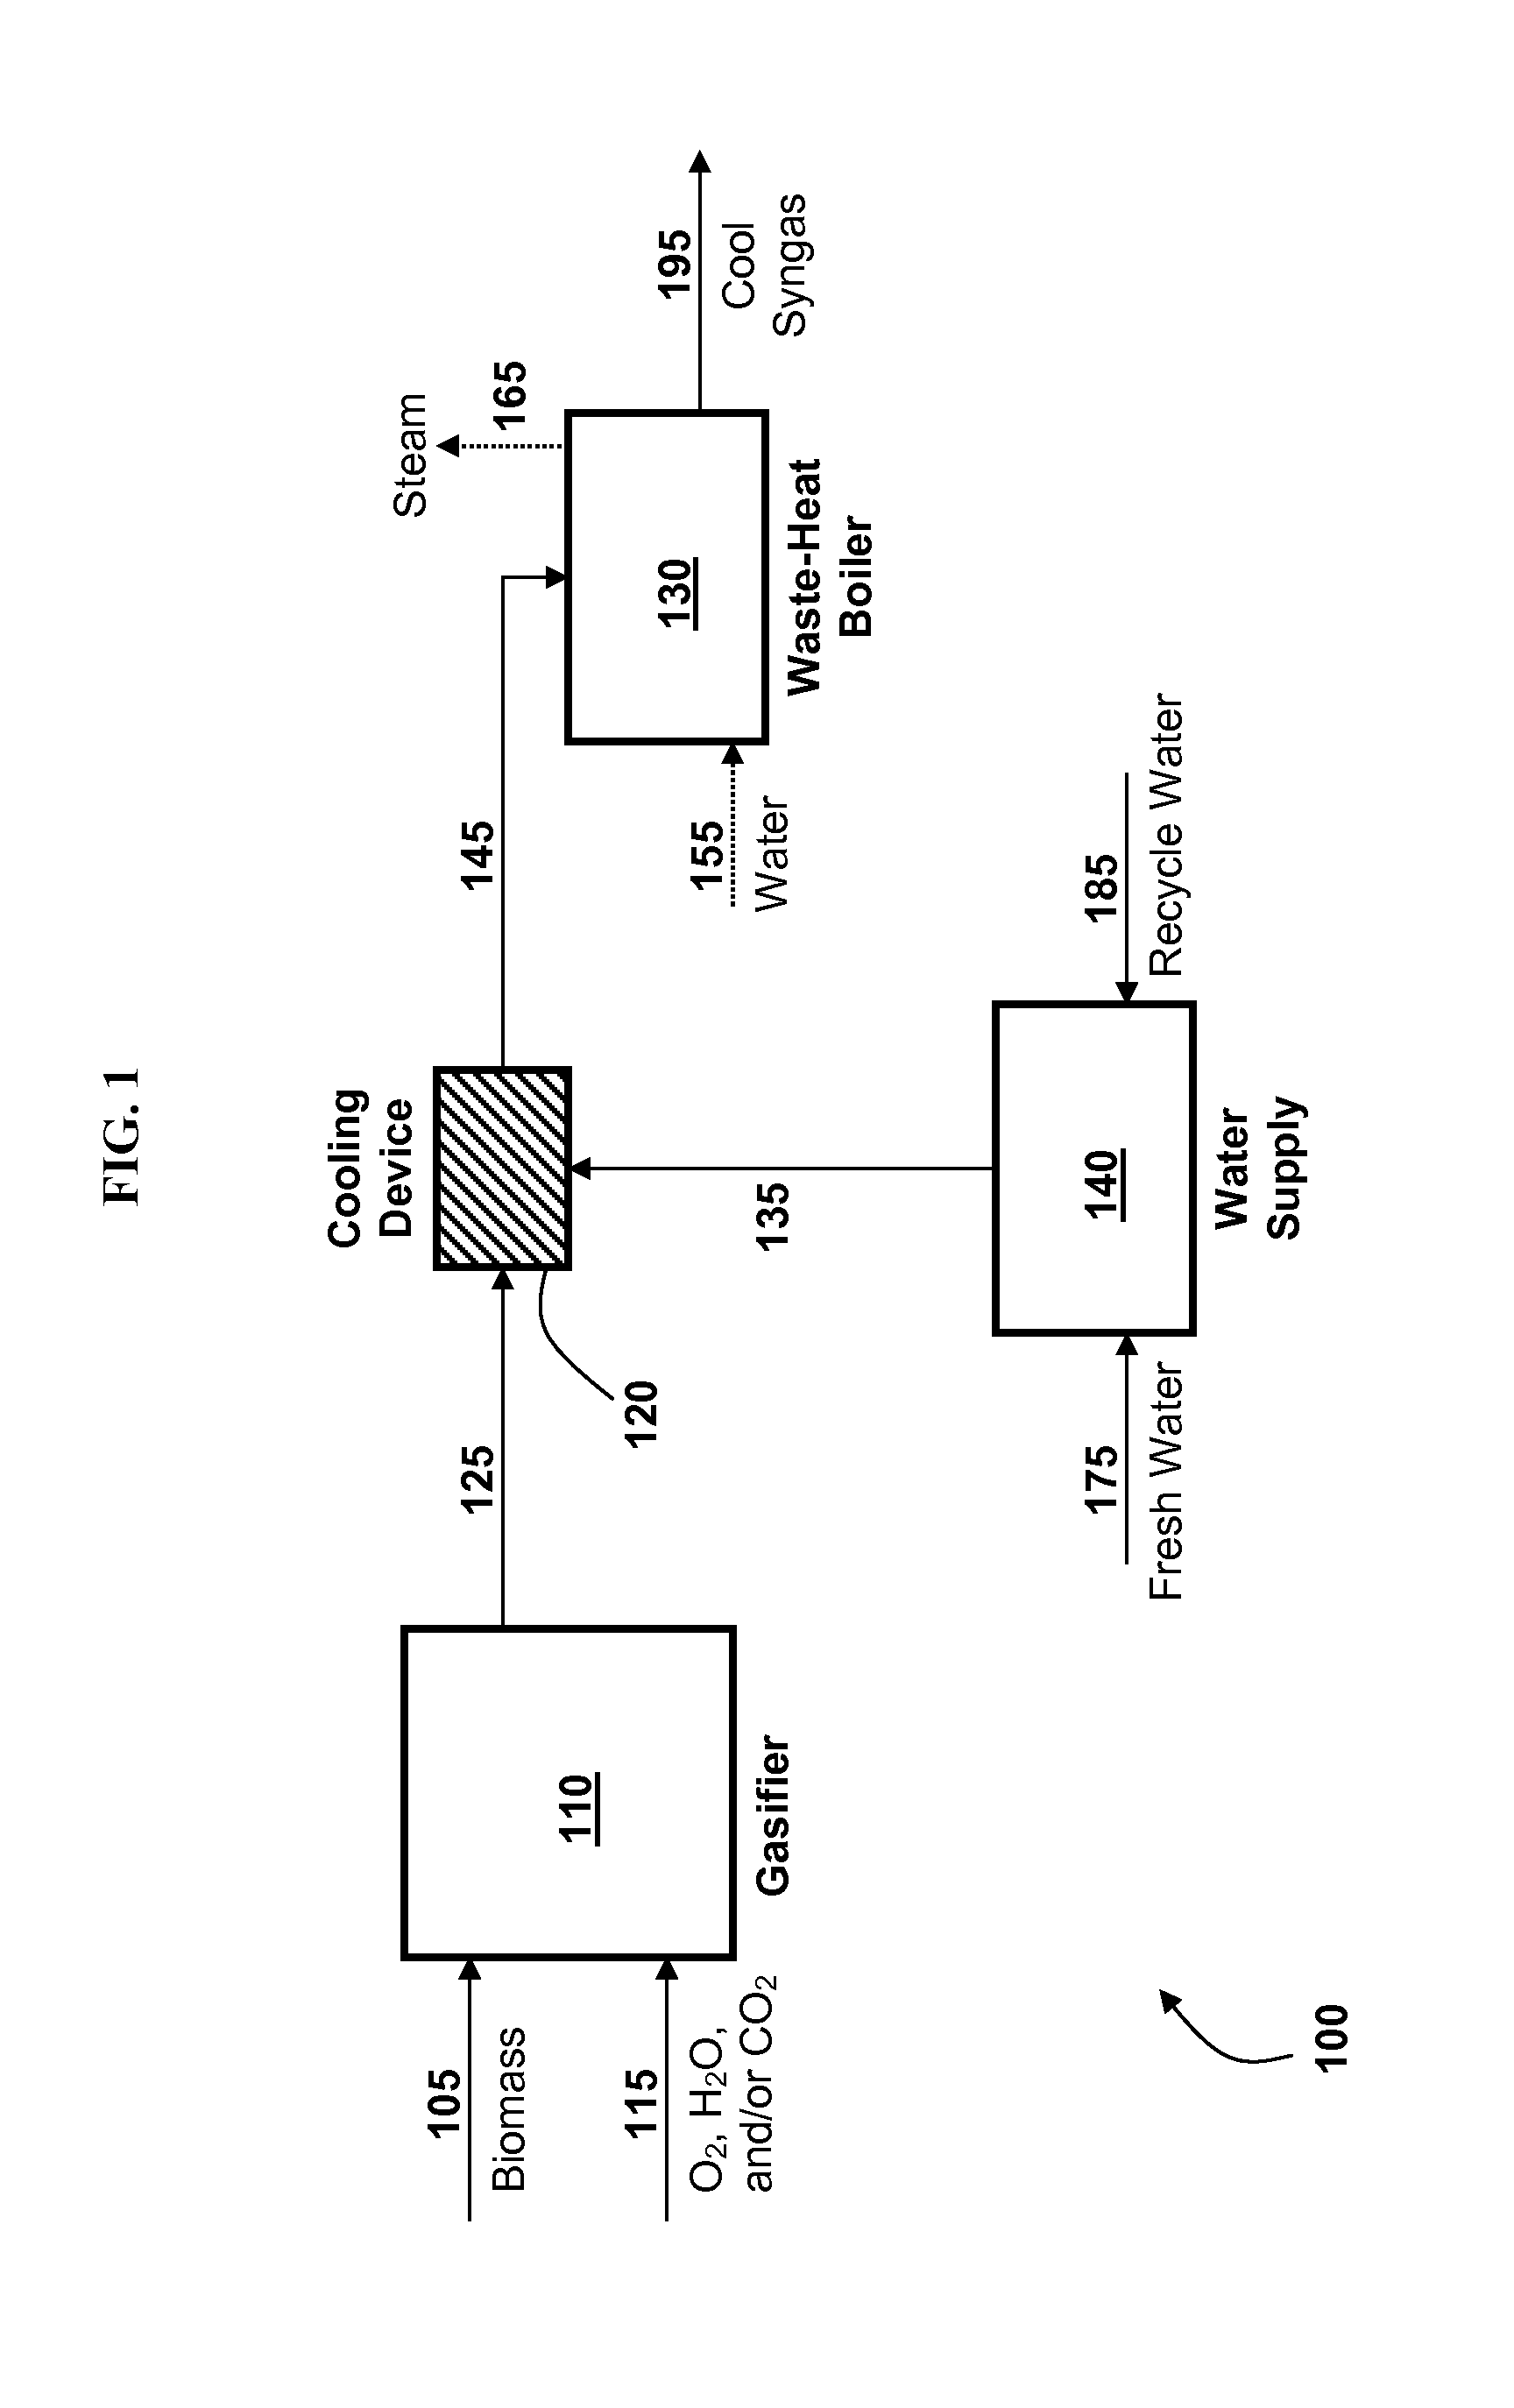 Methods and apparatus for cooling syngas from biomass gasification